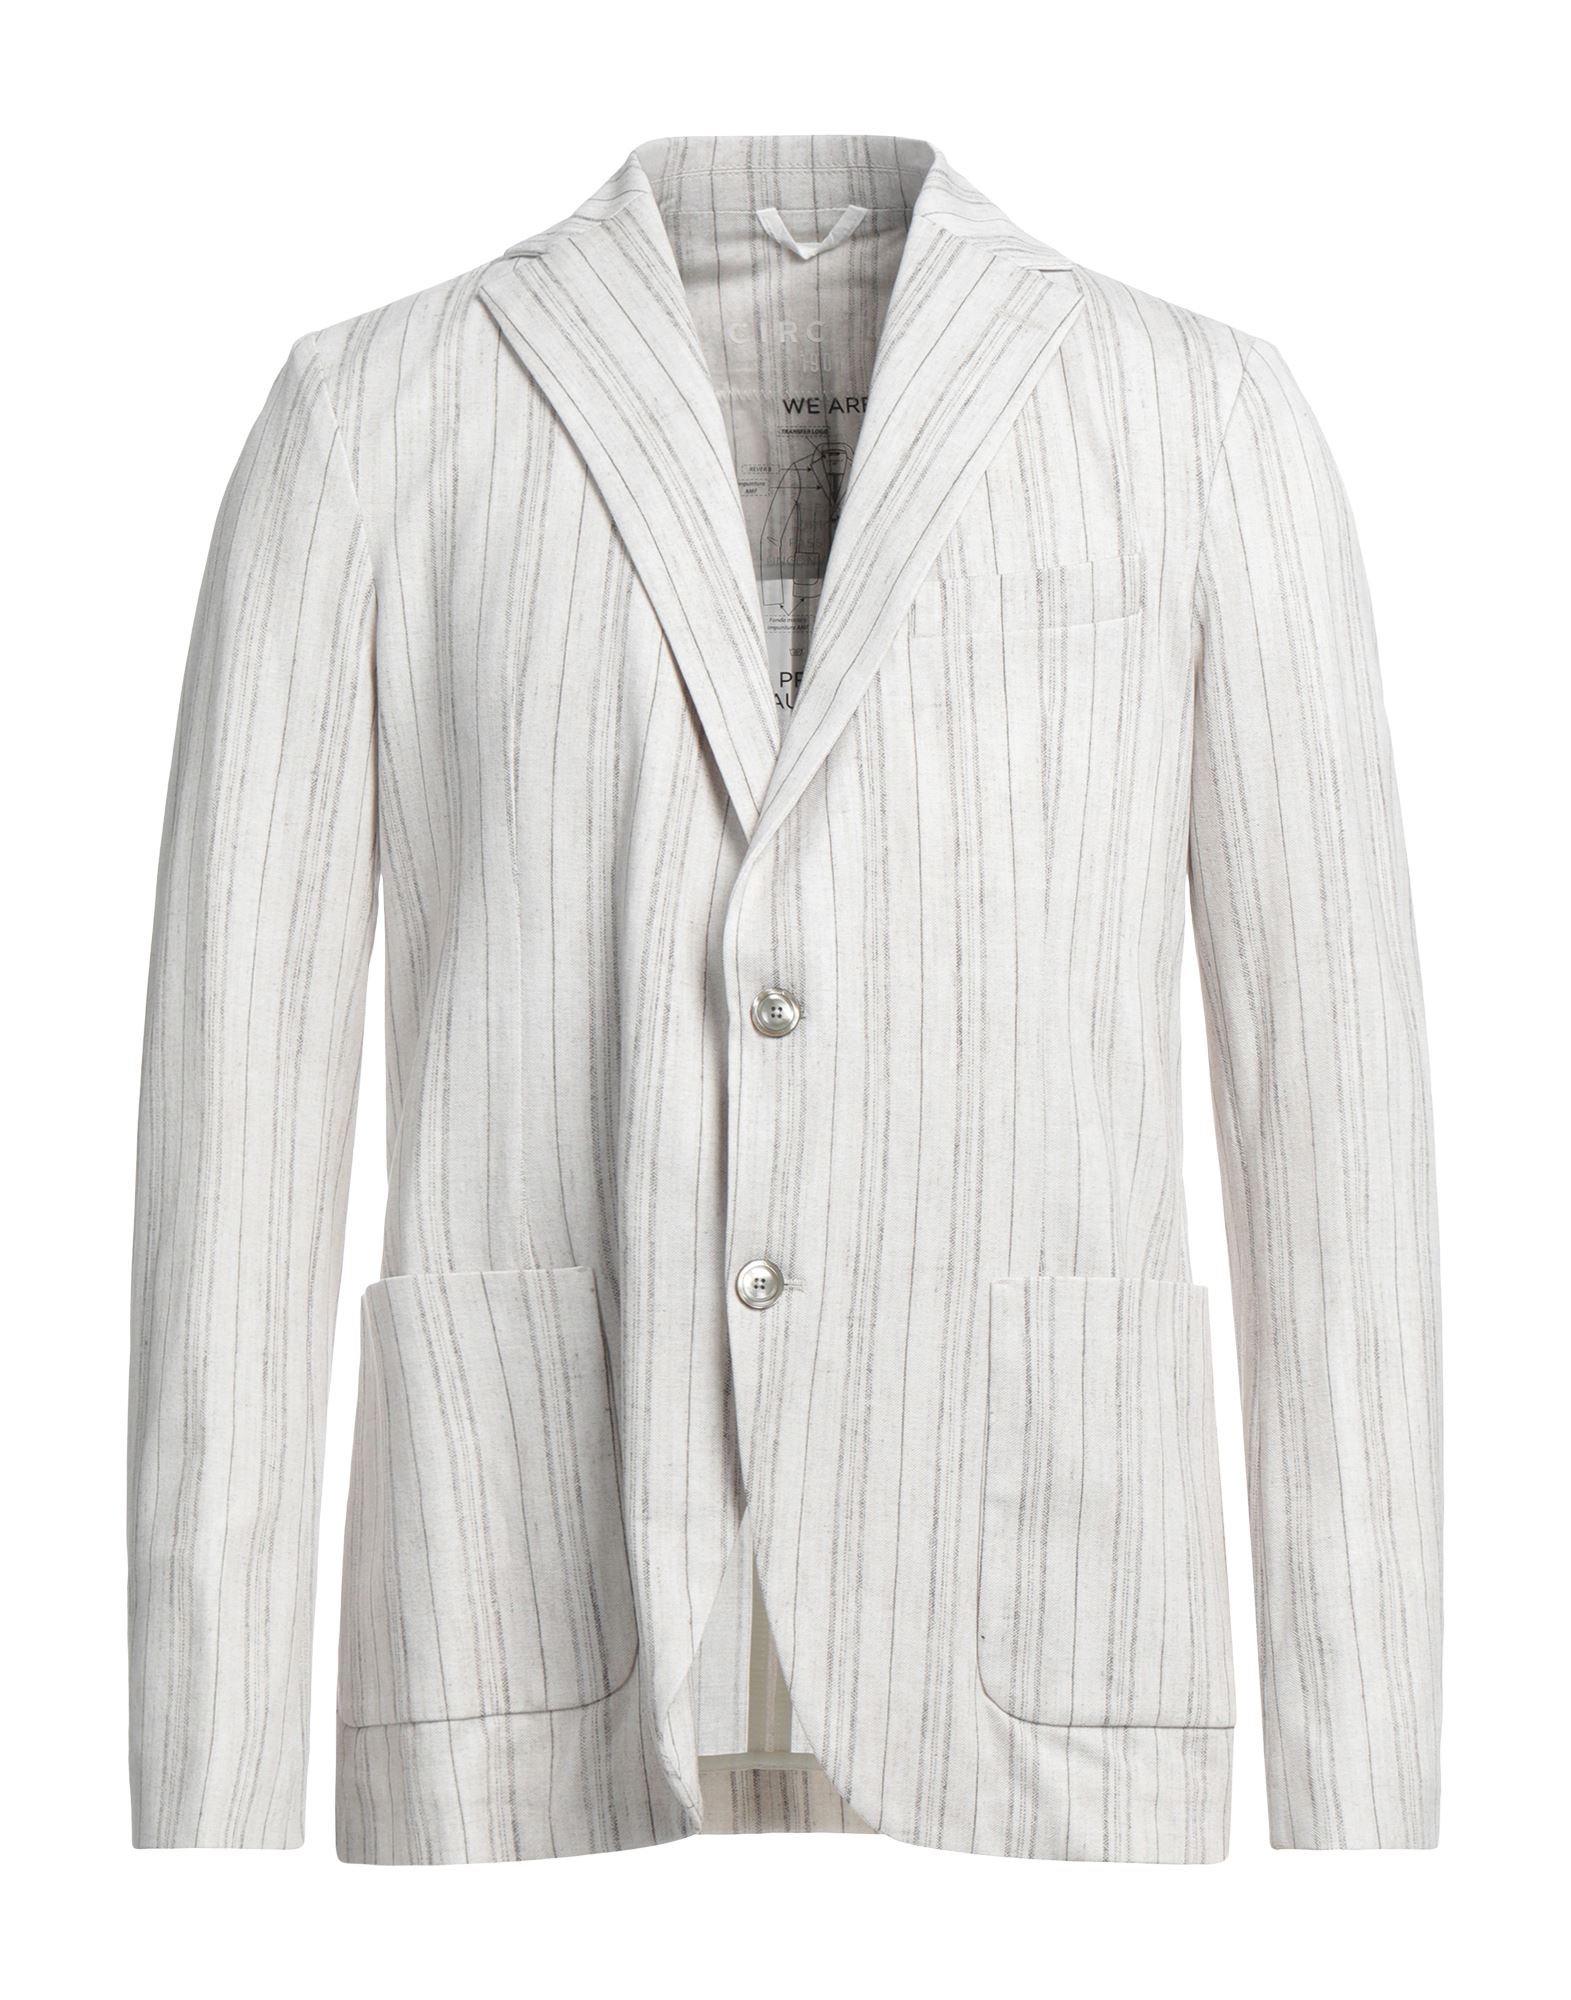 Circolo 1901 Suit Jackets In Beige | ModeSens